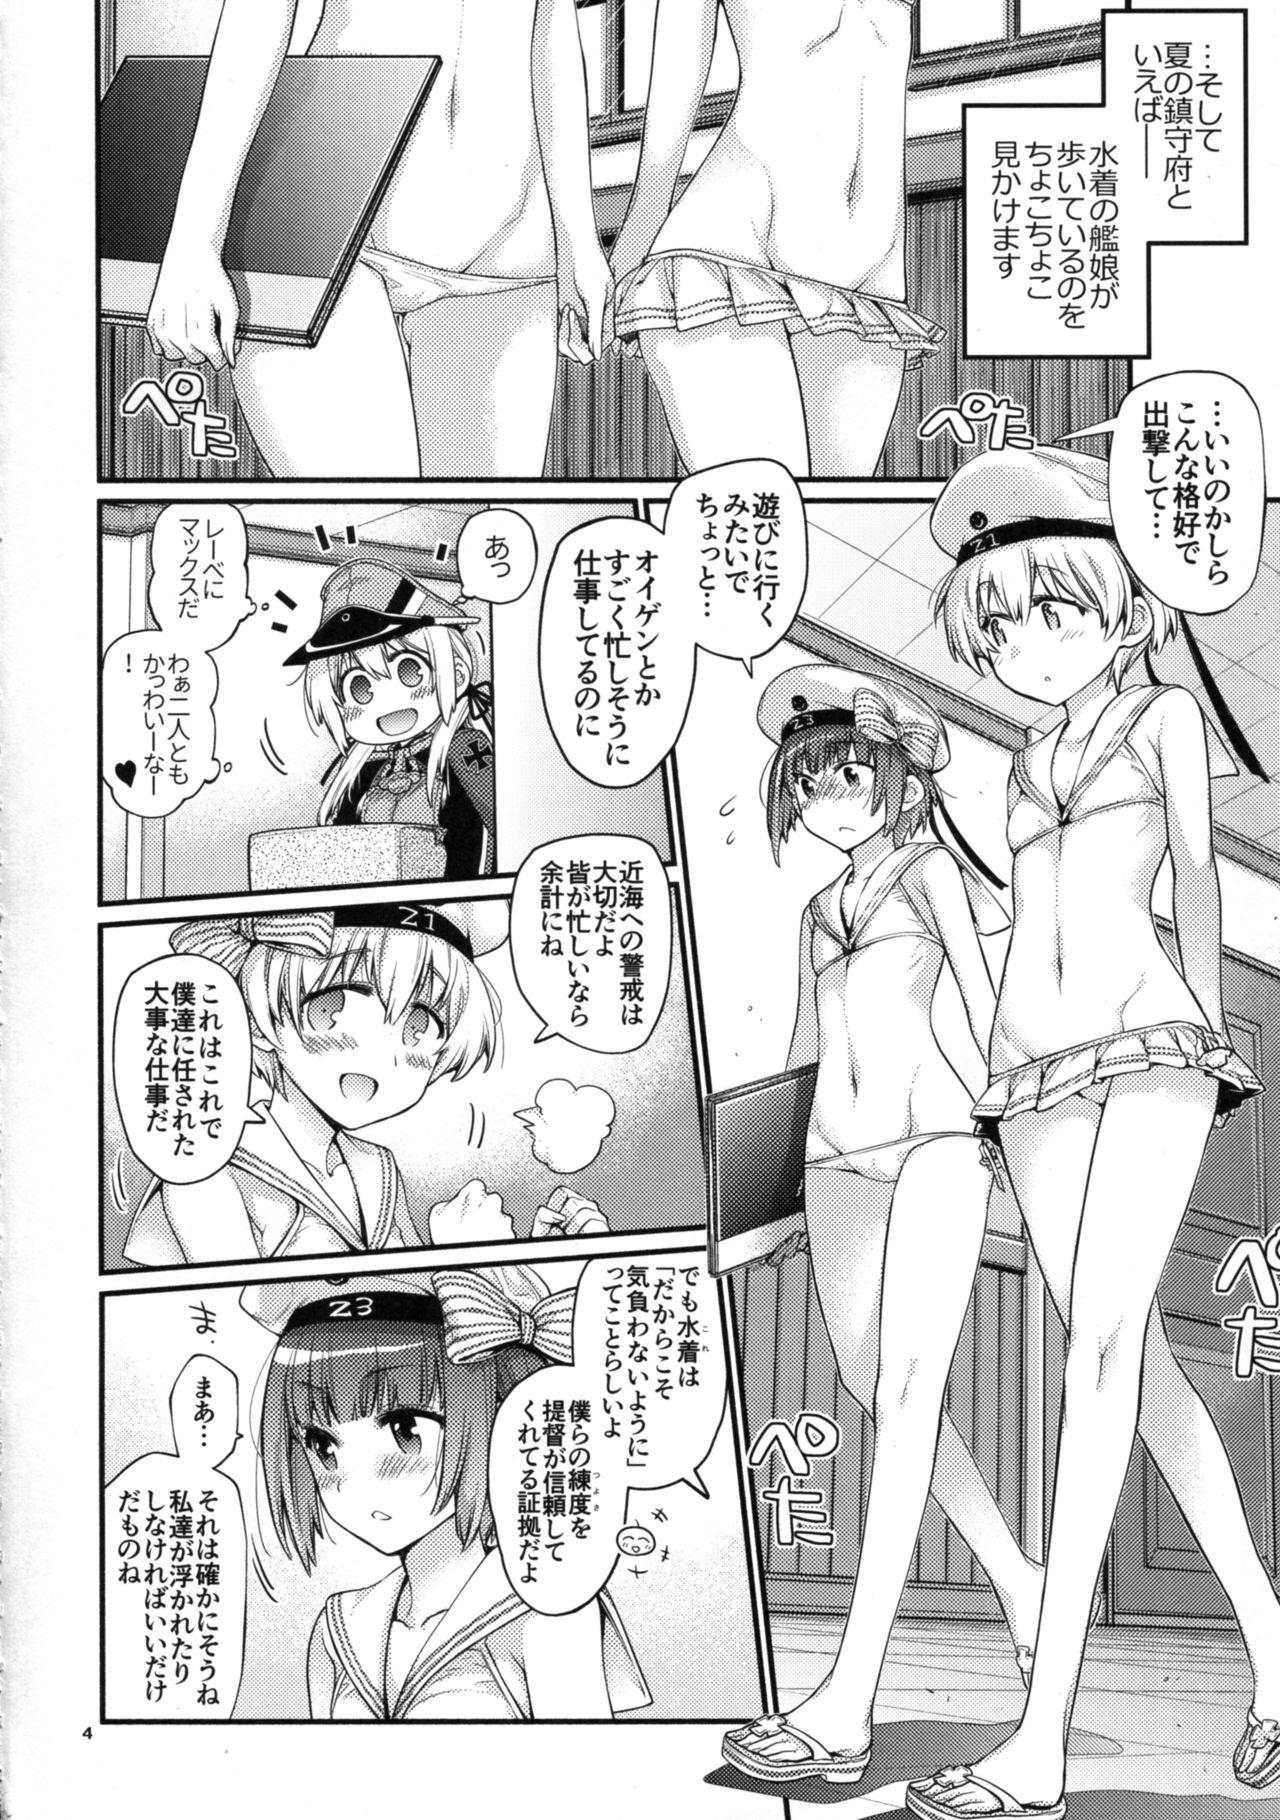 Pure18 Prinz Pudding 4 - Kantai collection Thailand - Page 4